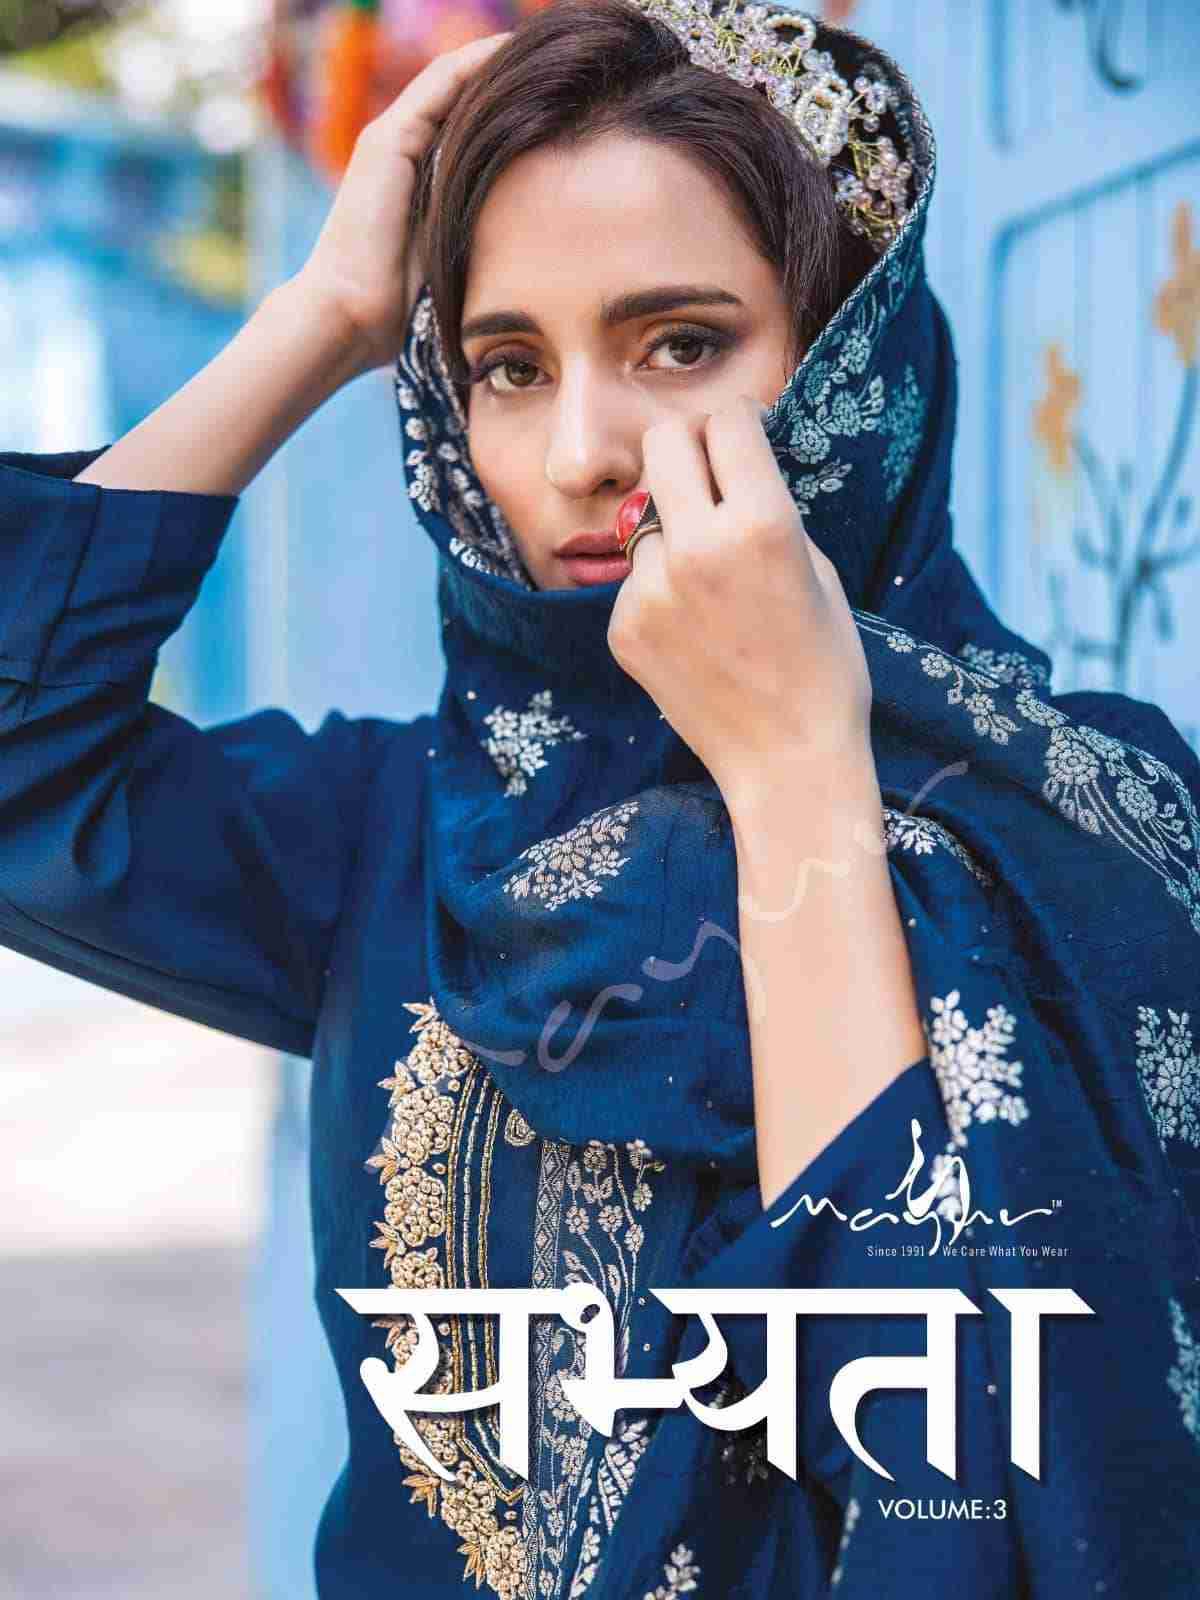 Sabhyata Vol-3 By Mayur 301 To 306 Series Beautiful Suits Colorful Stylish Fancy Casual Wear & Ethnic Wear Viscose Silk Dresses At Wholesale Price